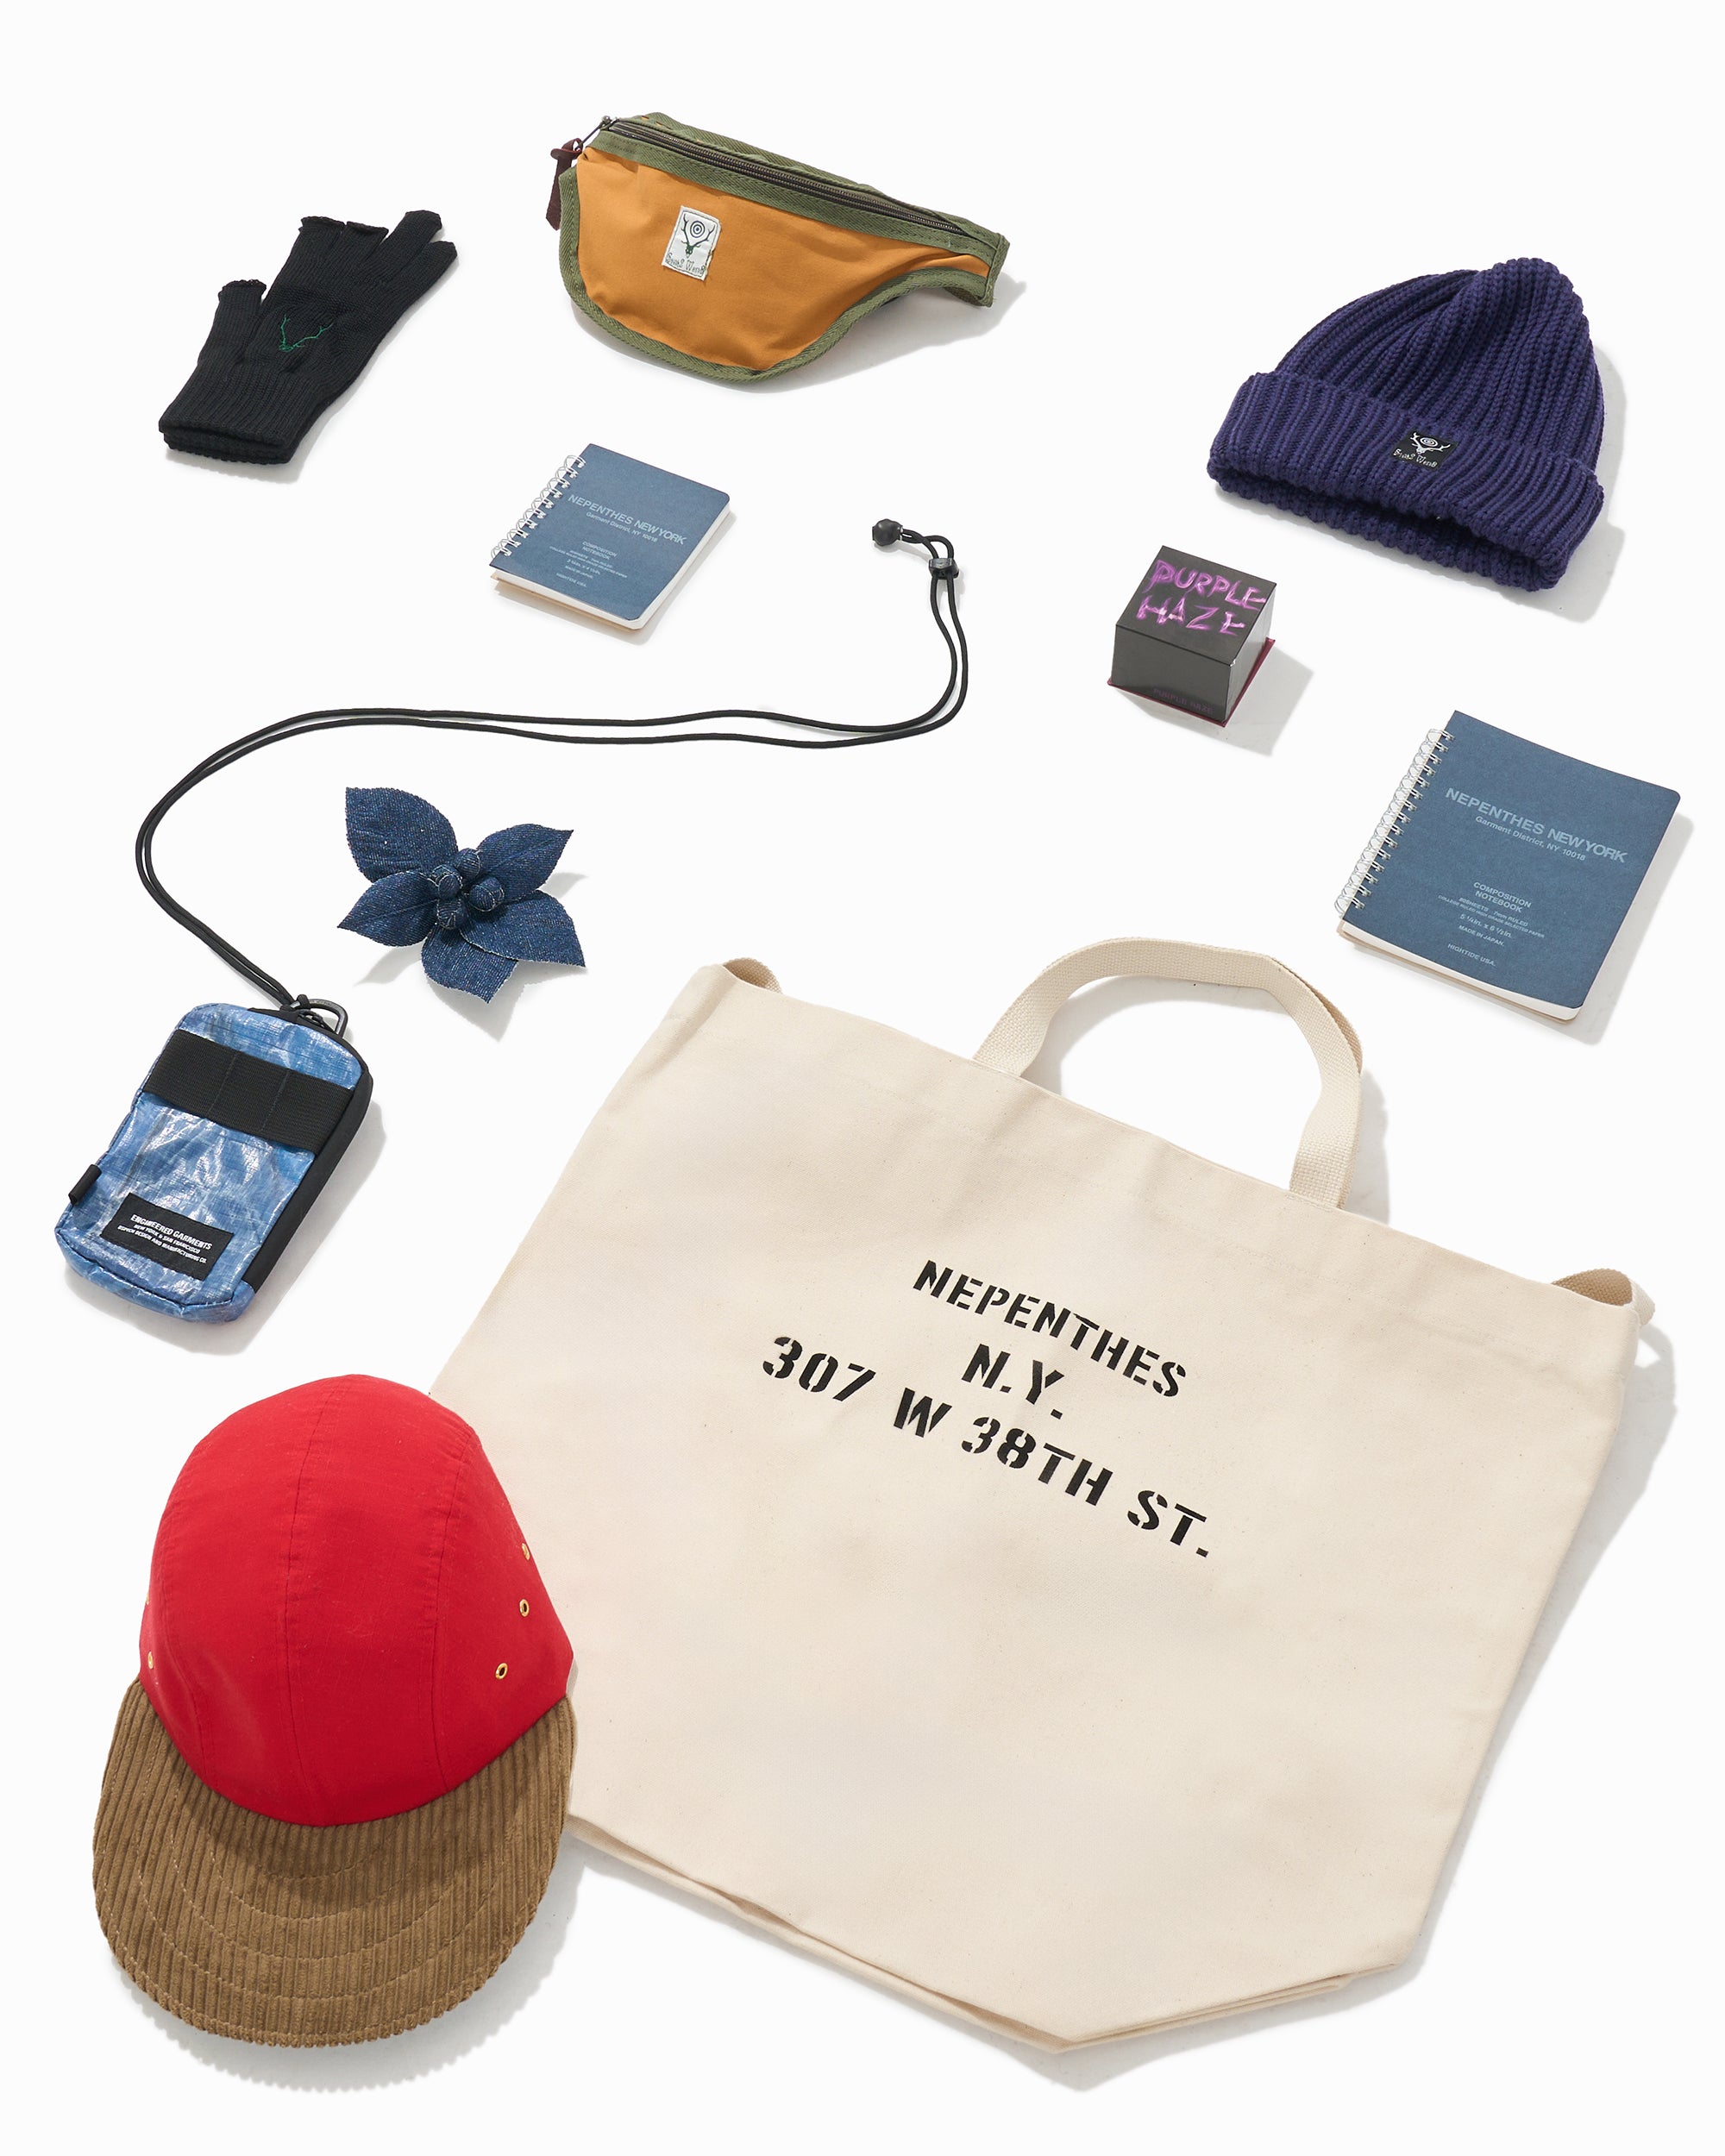 Gift Ideas - Nepenthes New York